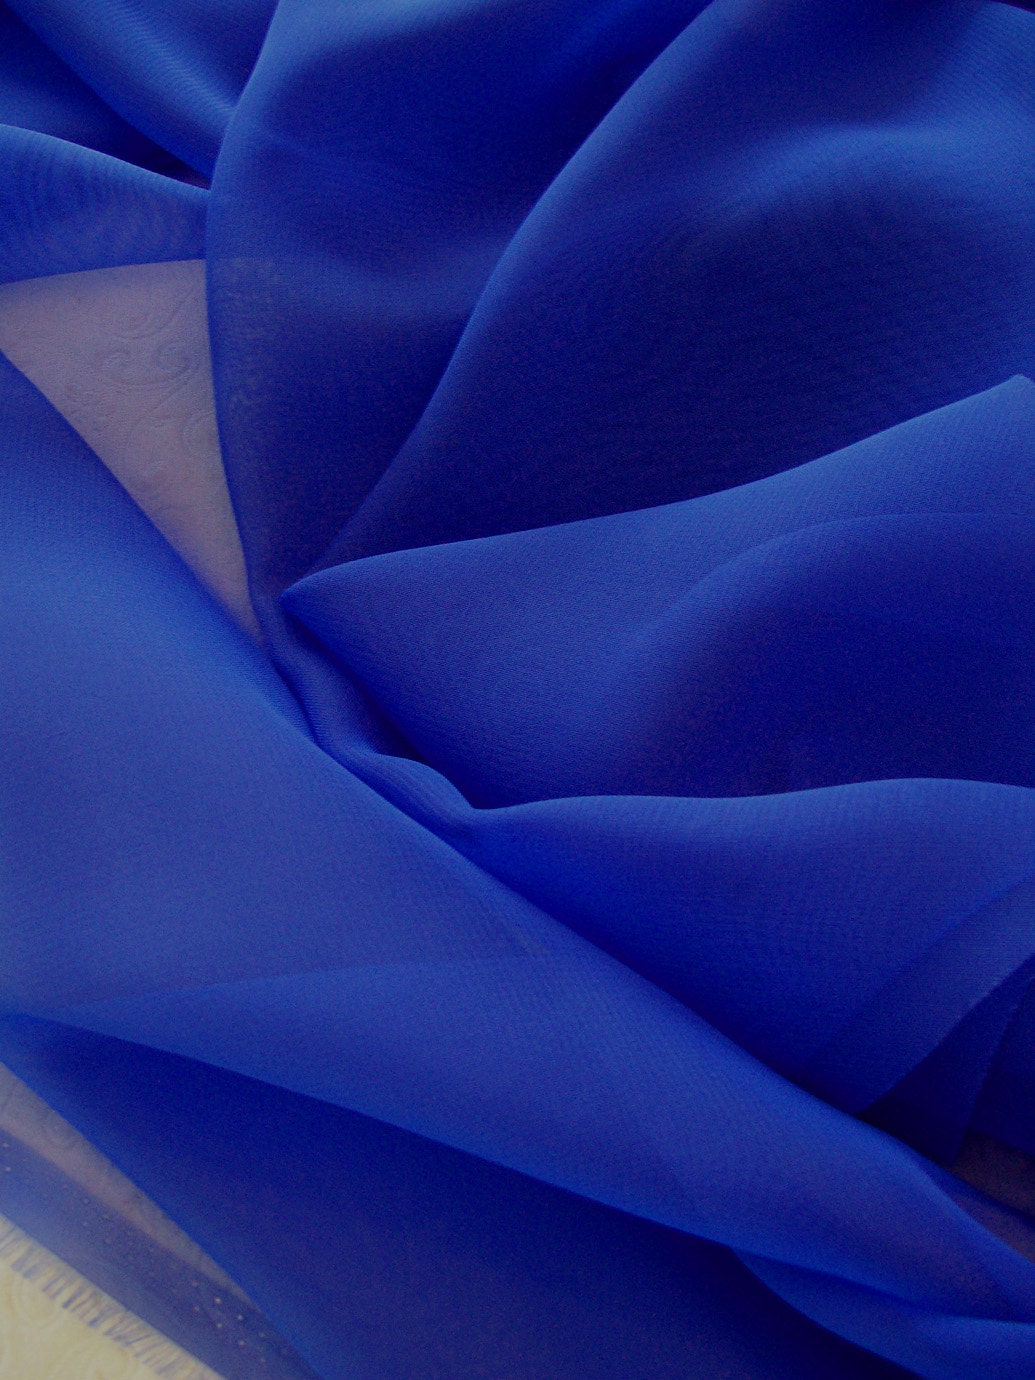 Polyester Chiffon Fabric Royal Blue color 60 wide